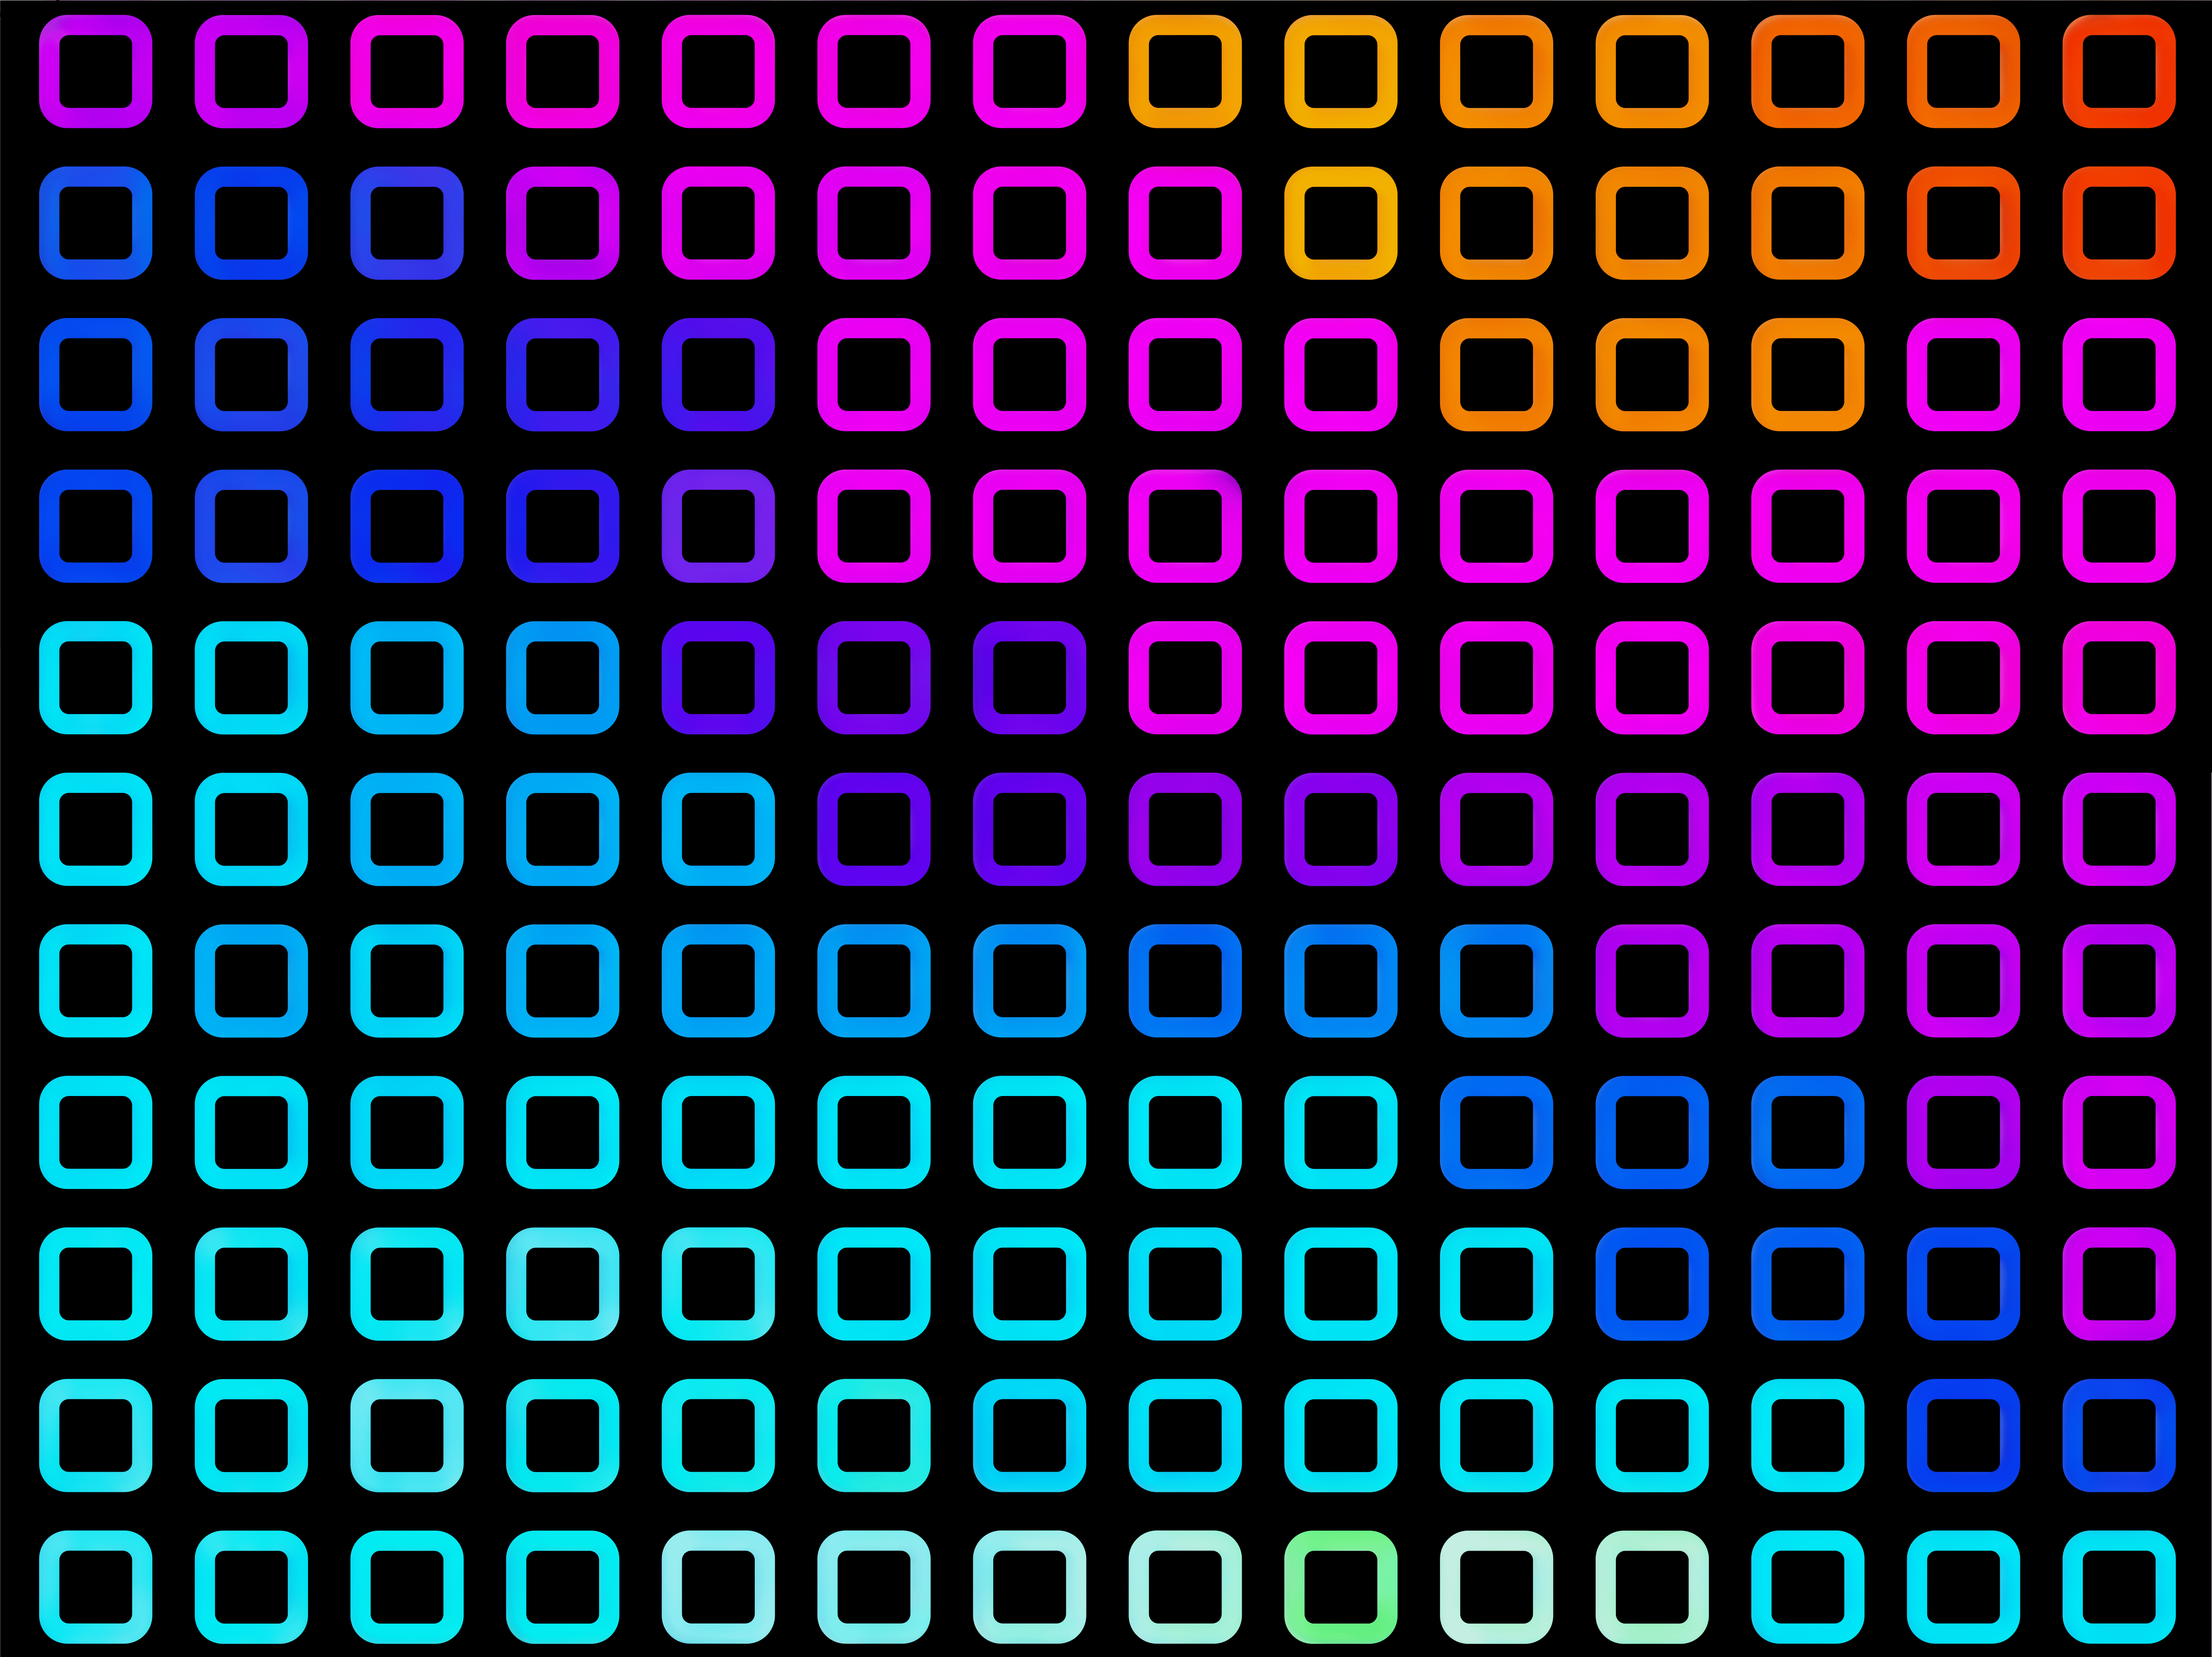 Amoled Neon Gradient Square Wallpaper in 2021 iPad Review [3840x2160]